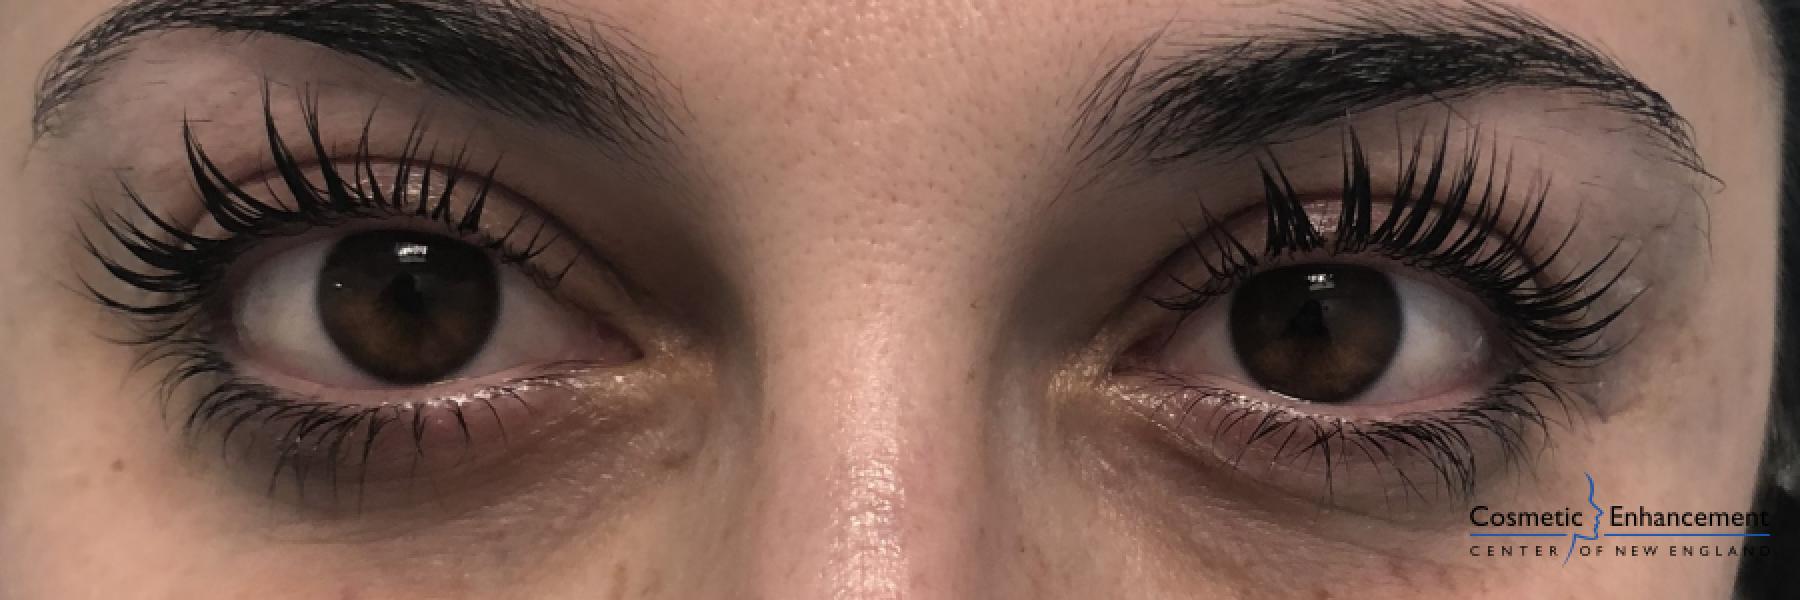 Lash Lift And Tint: Patient 1 - After  